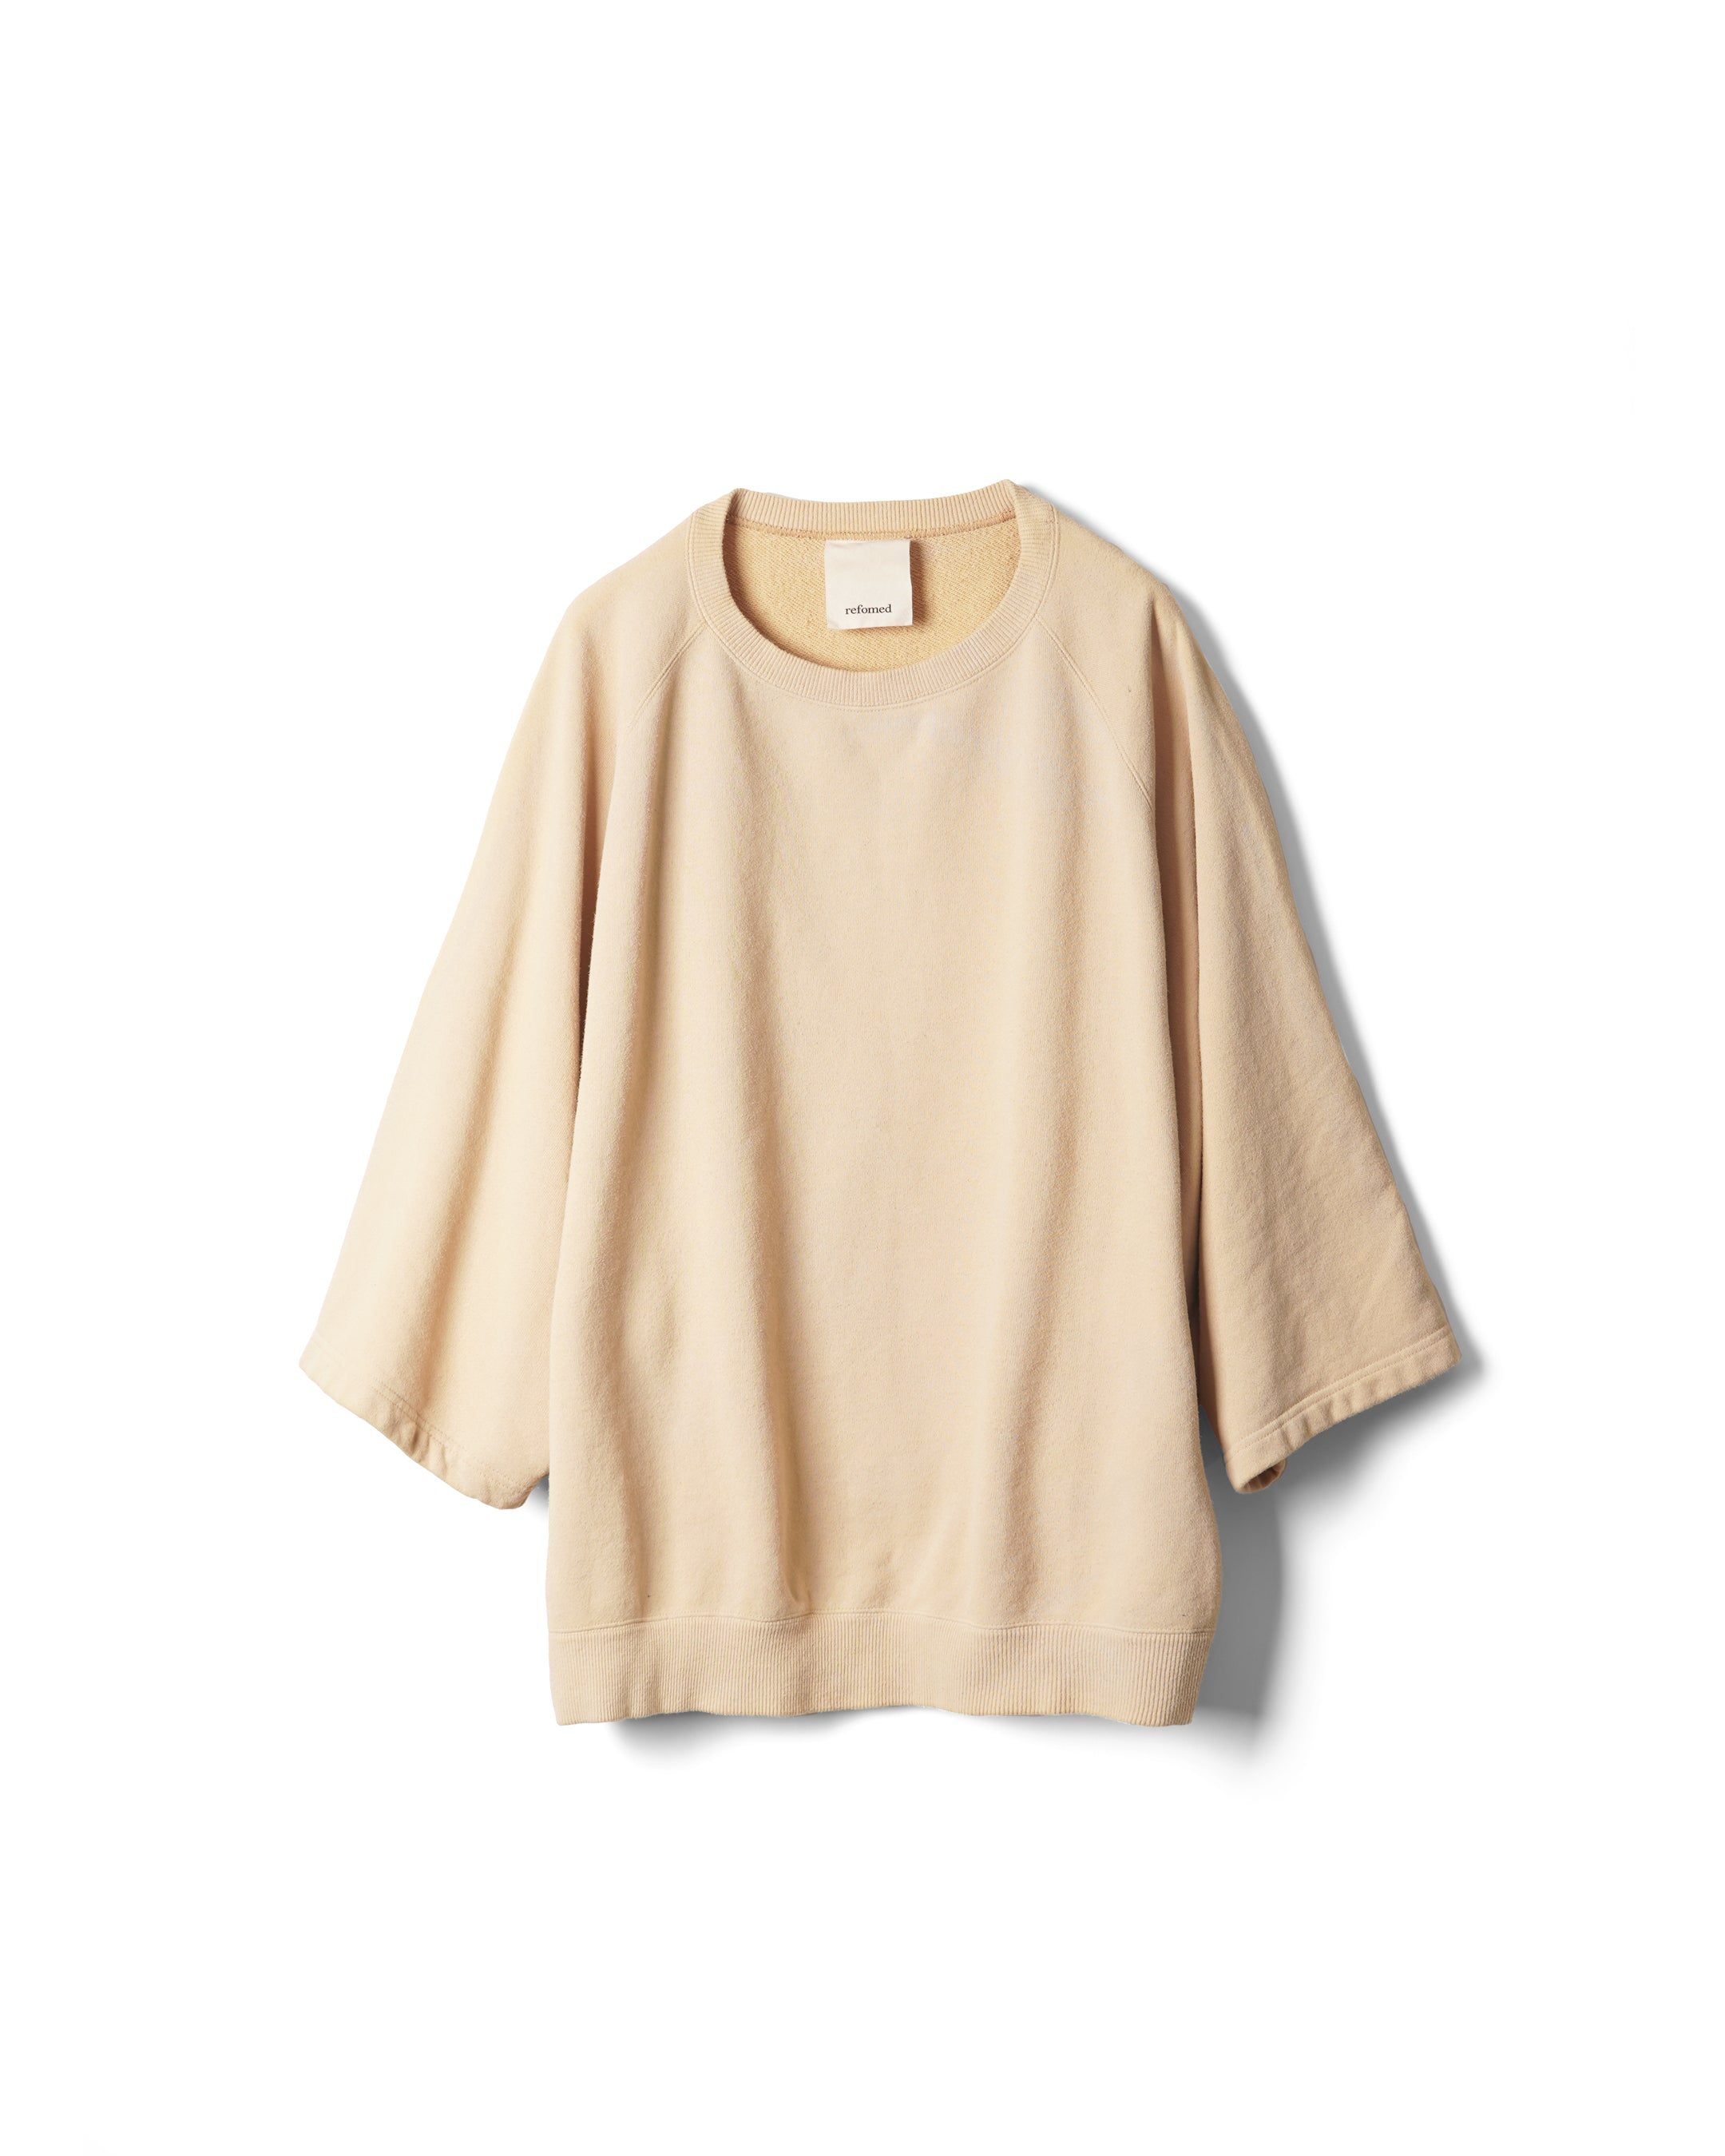 refomed(リフォメッド) / 10WASH S/S SWEATER -YELLOW-｜aIbn公式通販